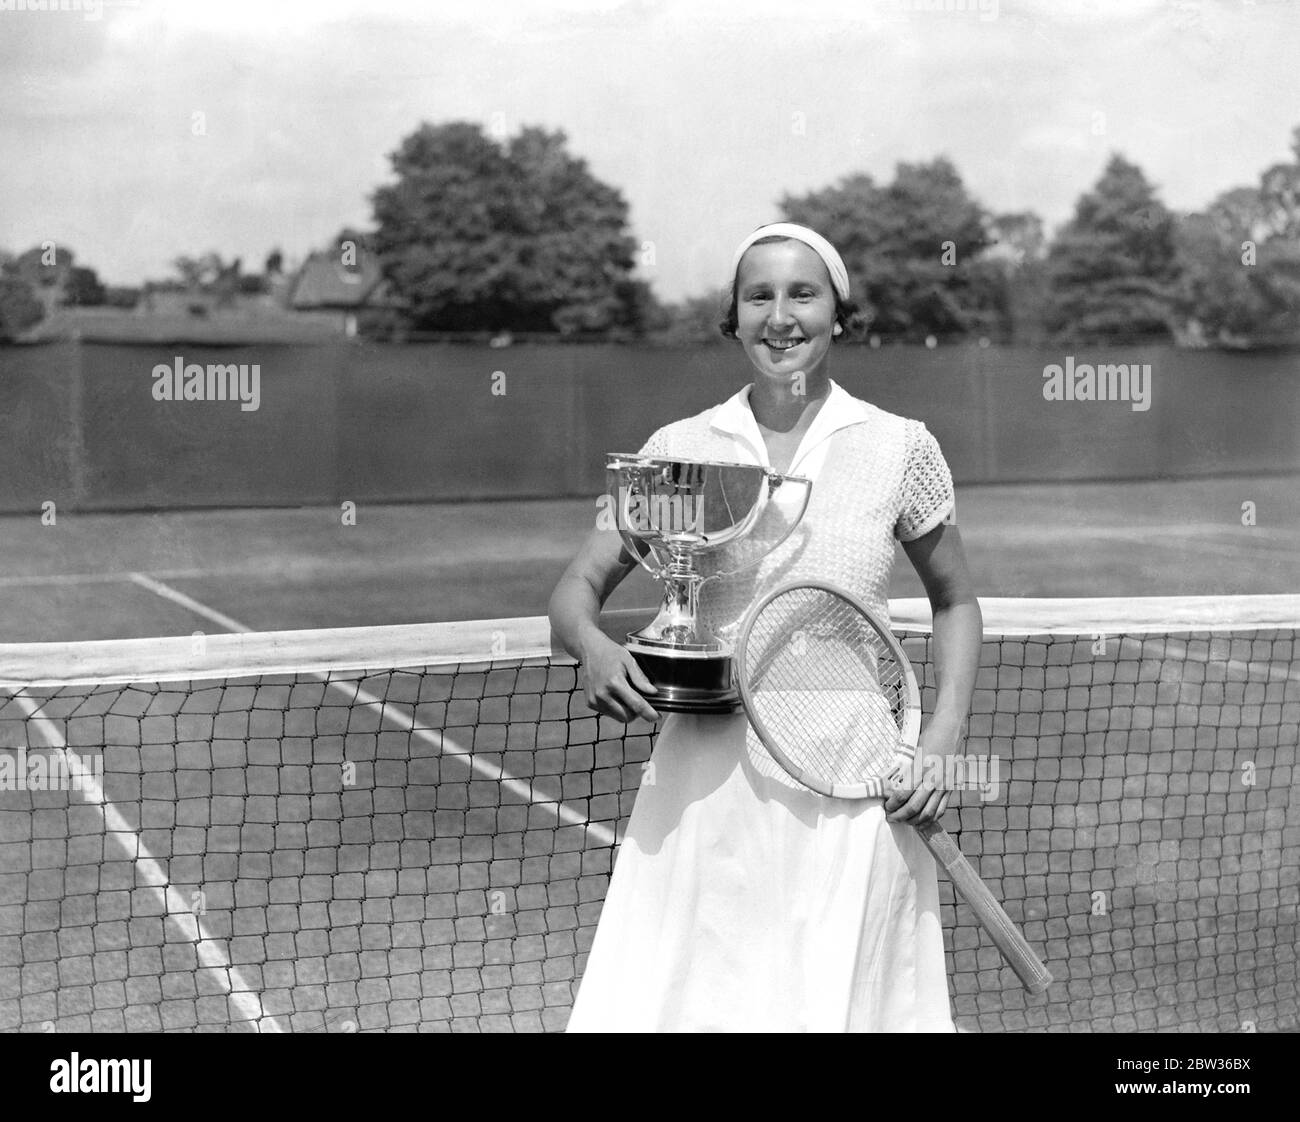 Miss Dorothy Round victorious in women ' s singles of Kent championships . Miss Dorothy Round defeated Mrs Michel in the women ' s singles of the Kent all comers tennis championship at Beckenham . Photo shows Miss Dorothy Round on the tennis court with the Championship Cup . 17 June 1933 Stock Photo